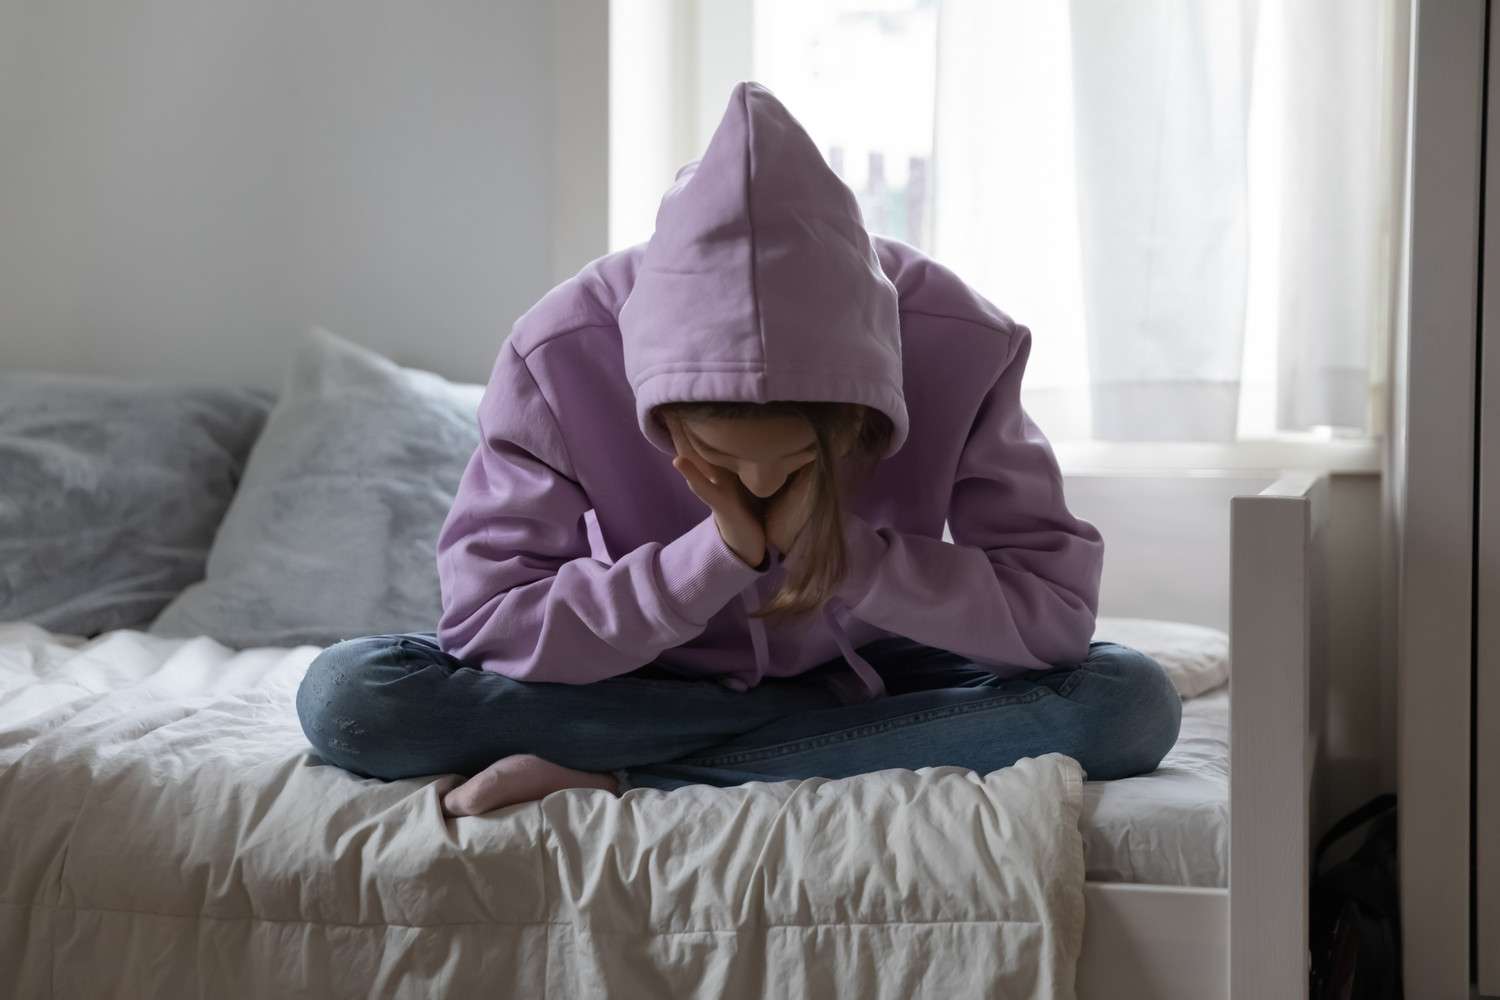 Unhappy teenage girl sitting alone on bed, wearing a sweatshirt and looking depressed.